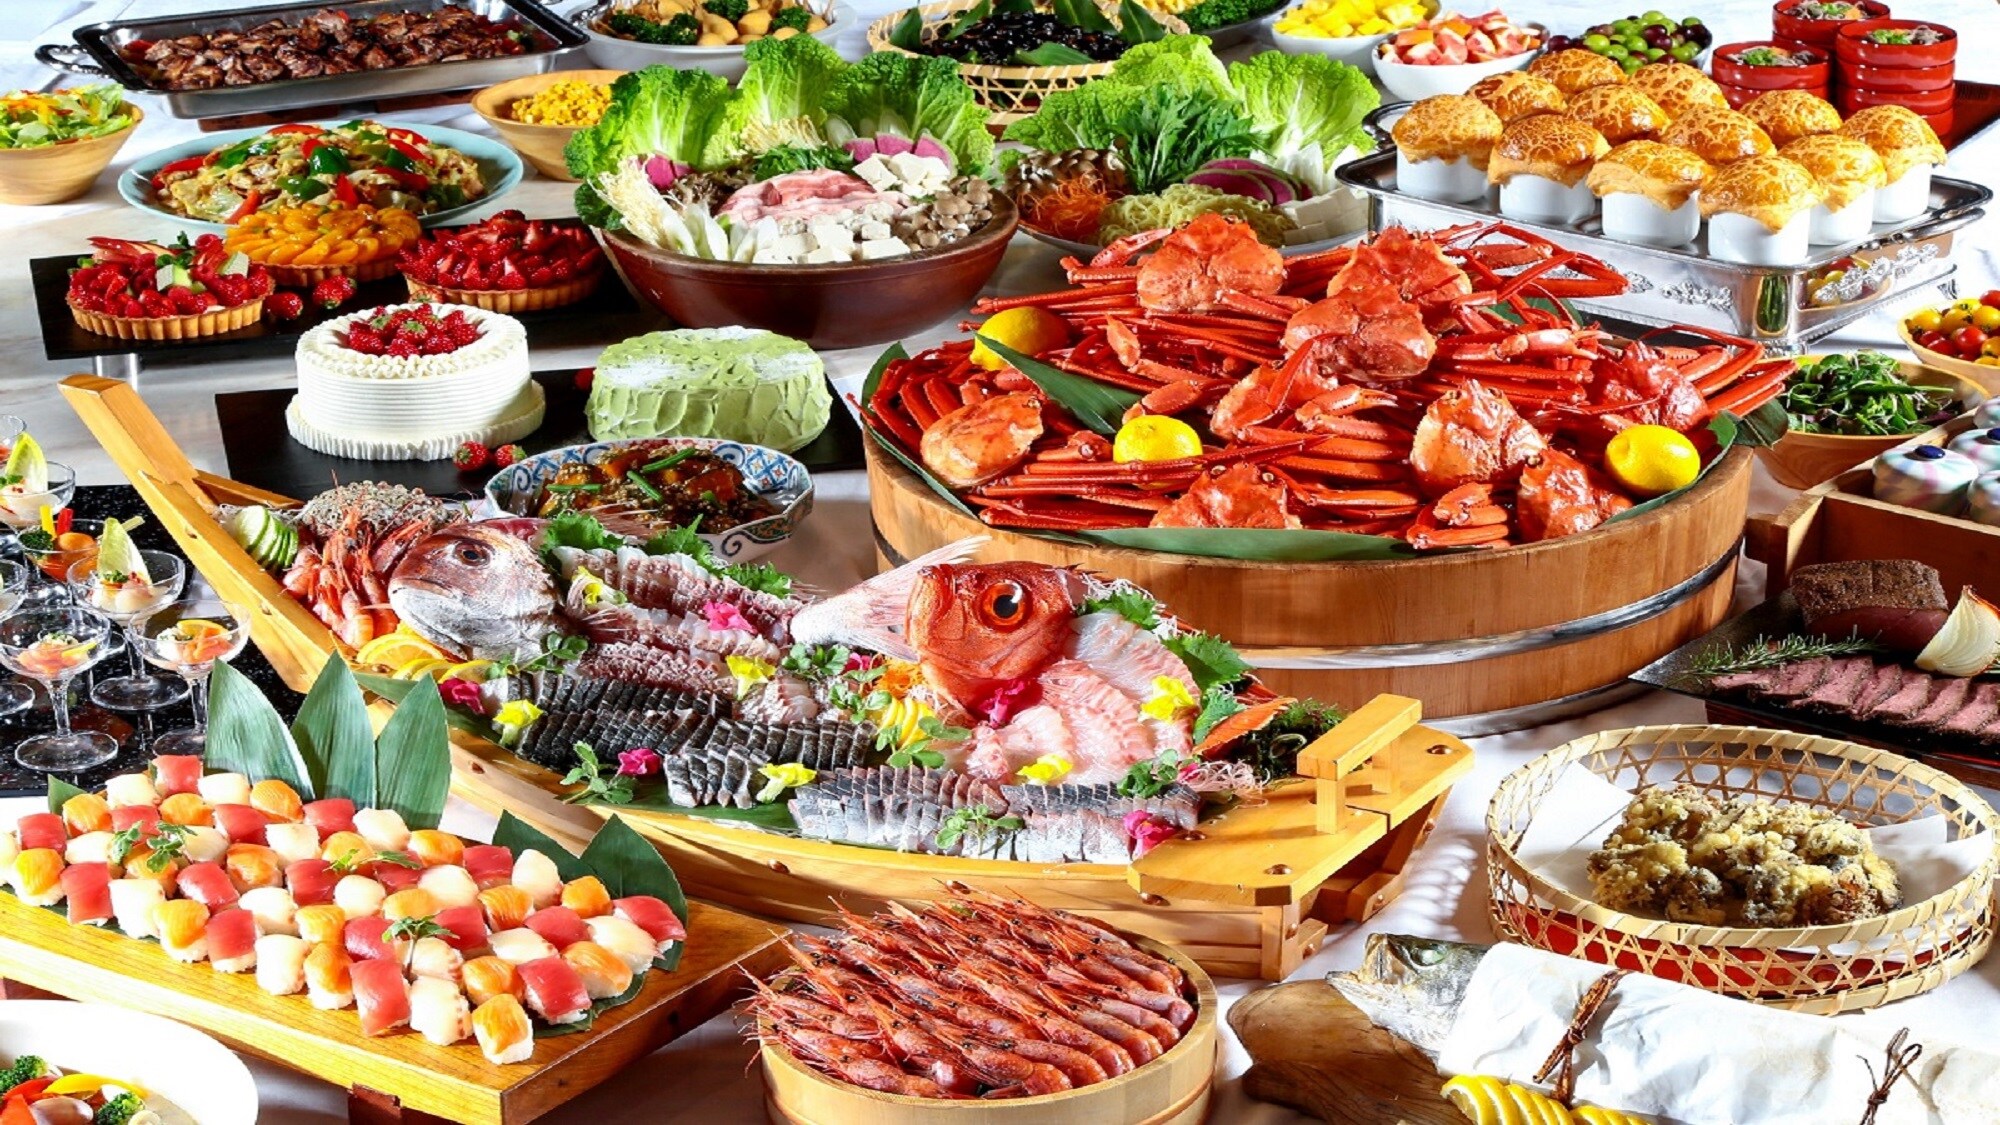 Overall image of dinner buffet